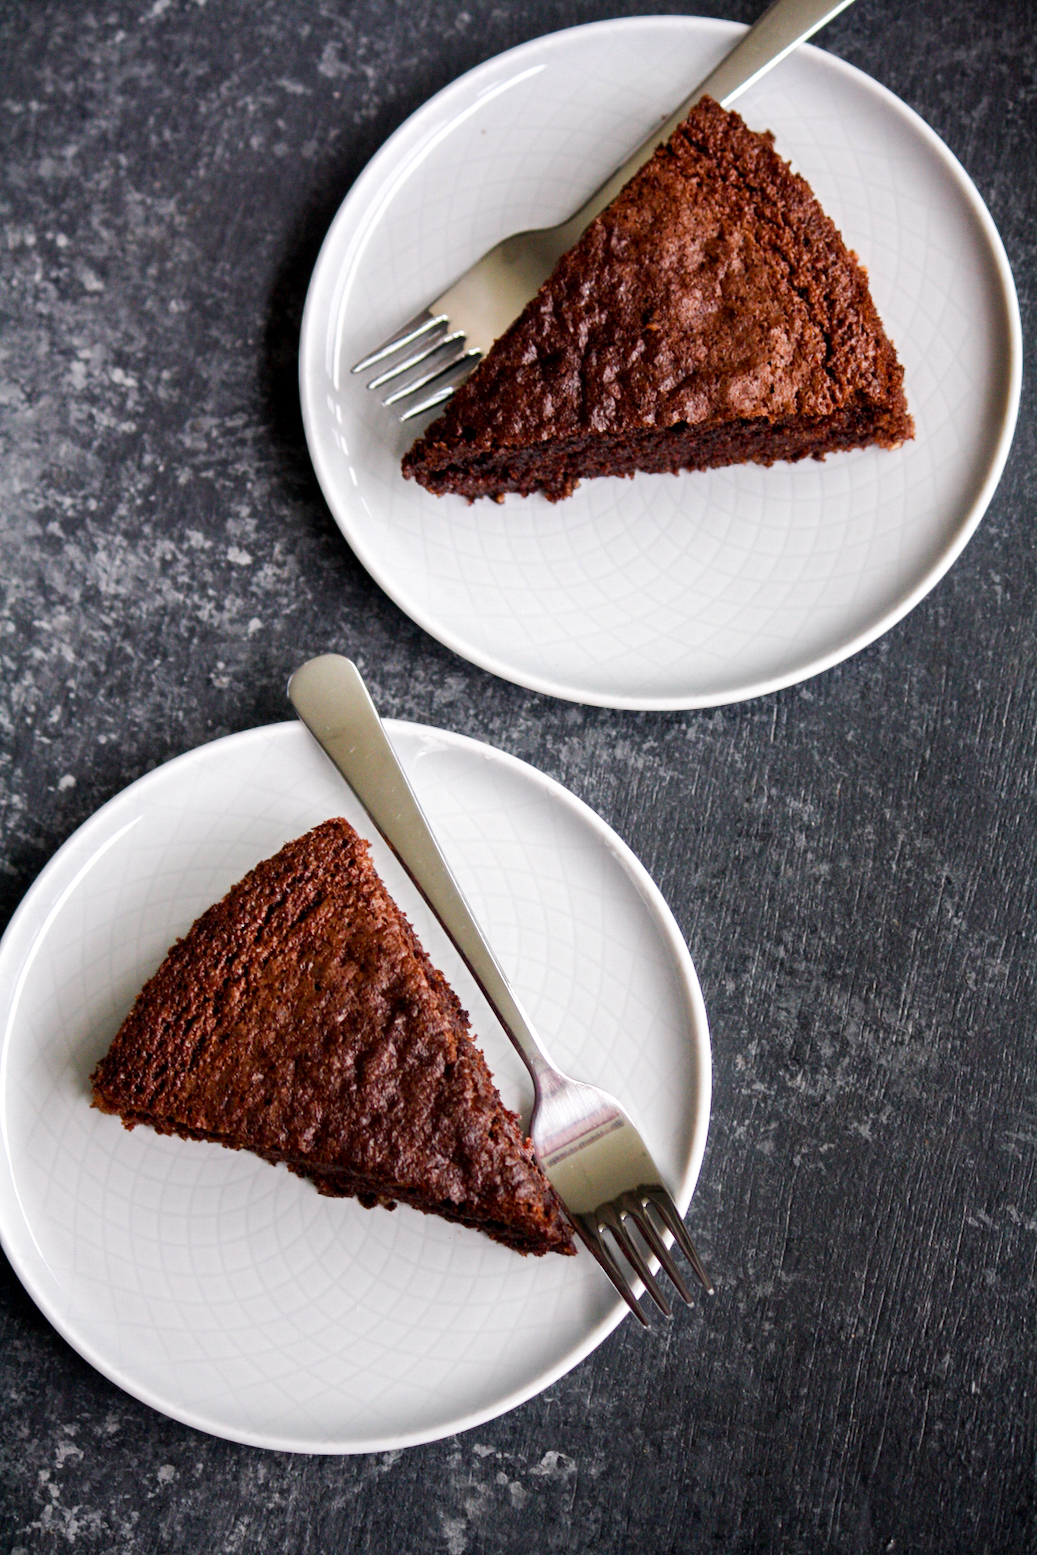 Super moist and soft chocolate cake made with ground almonds and olive oil